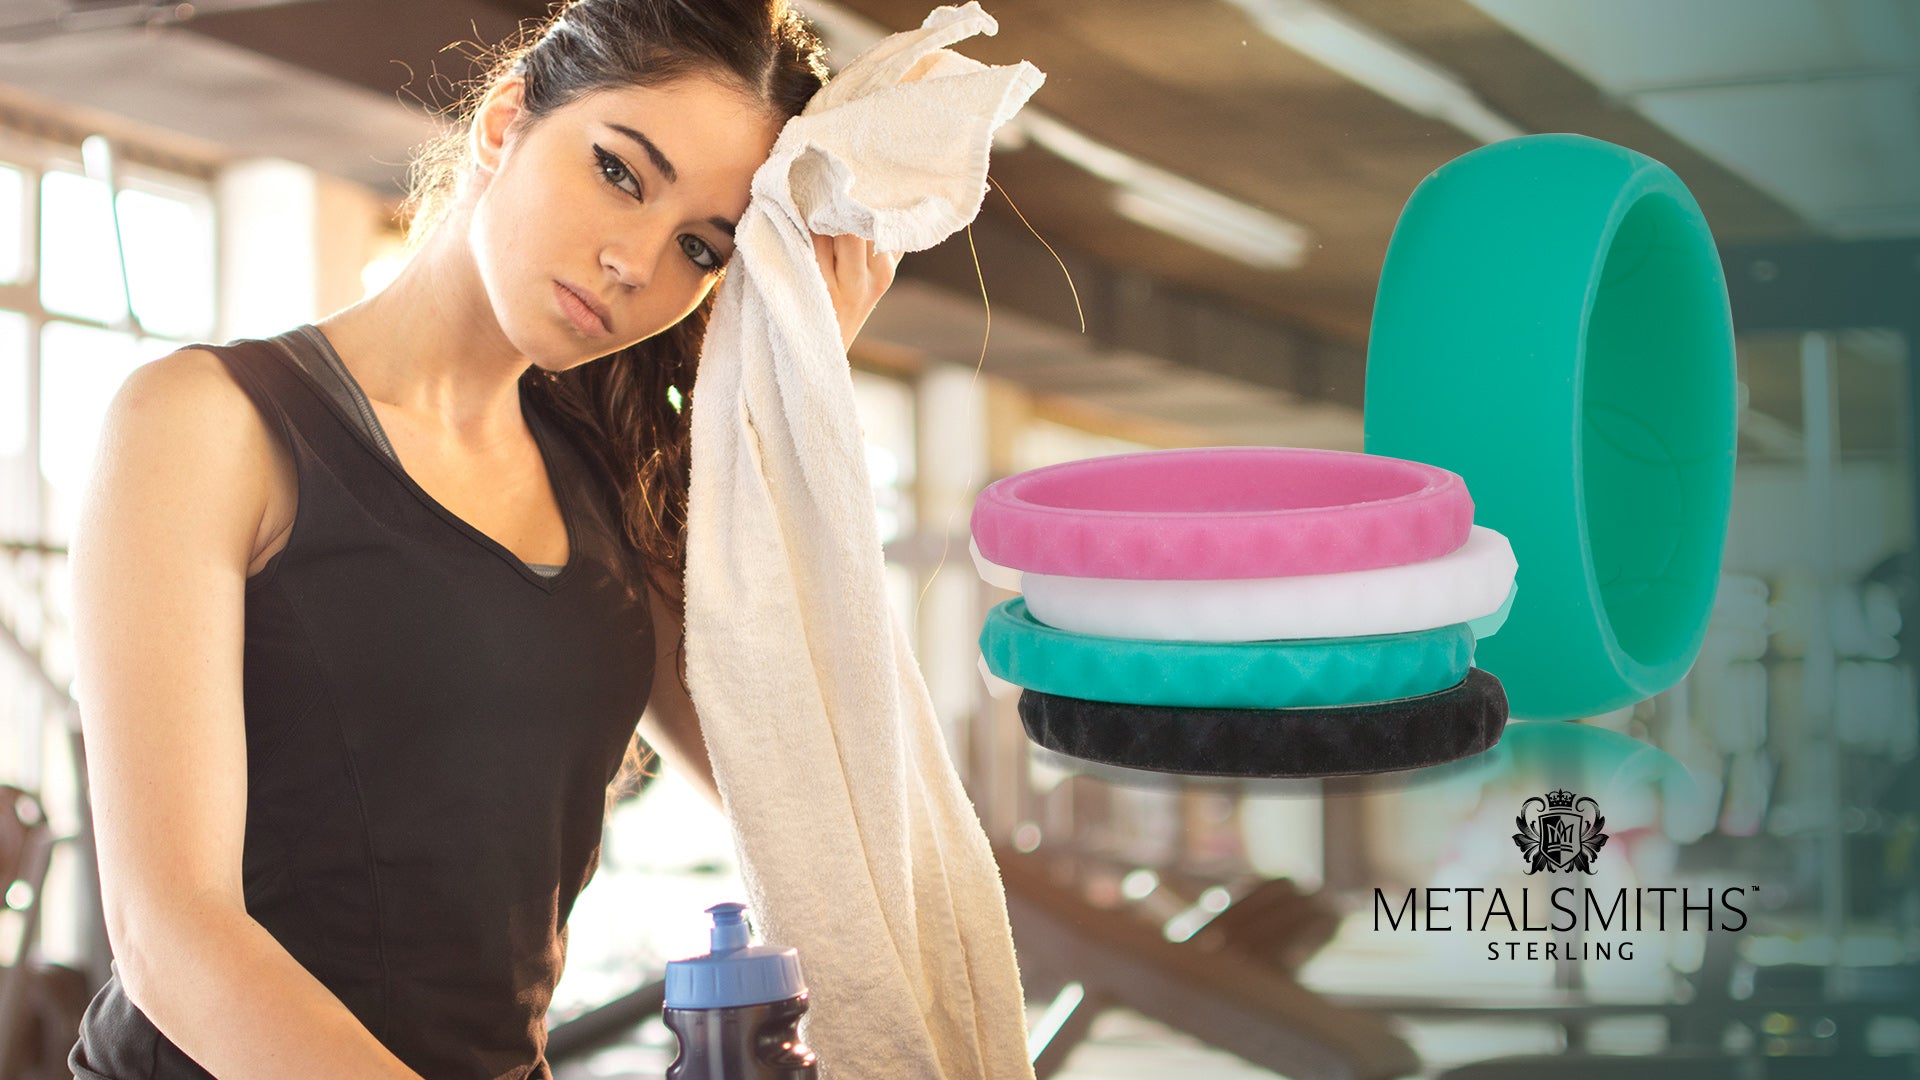 Metalsmiths Sterling Silicone Active Bands